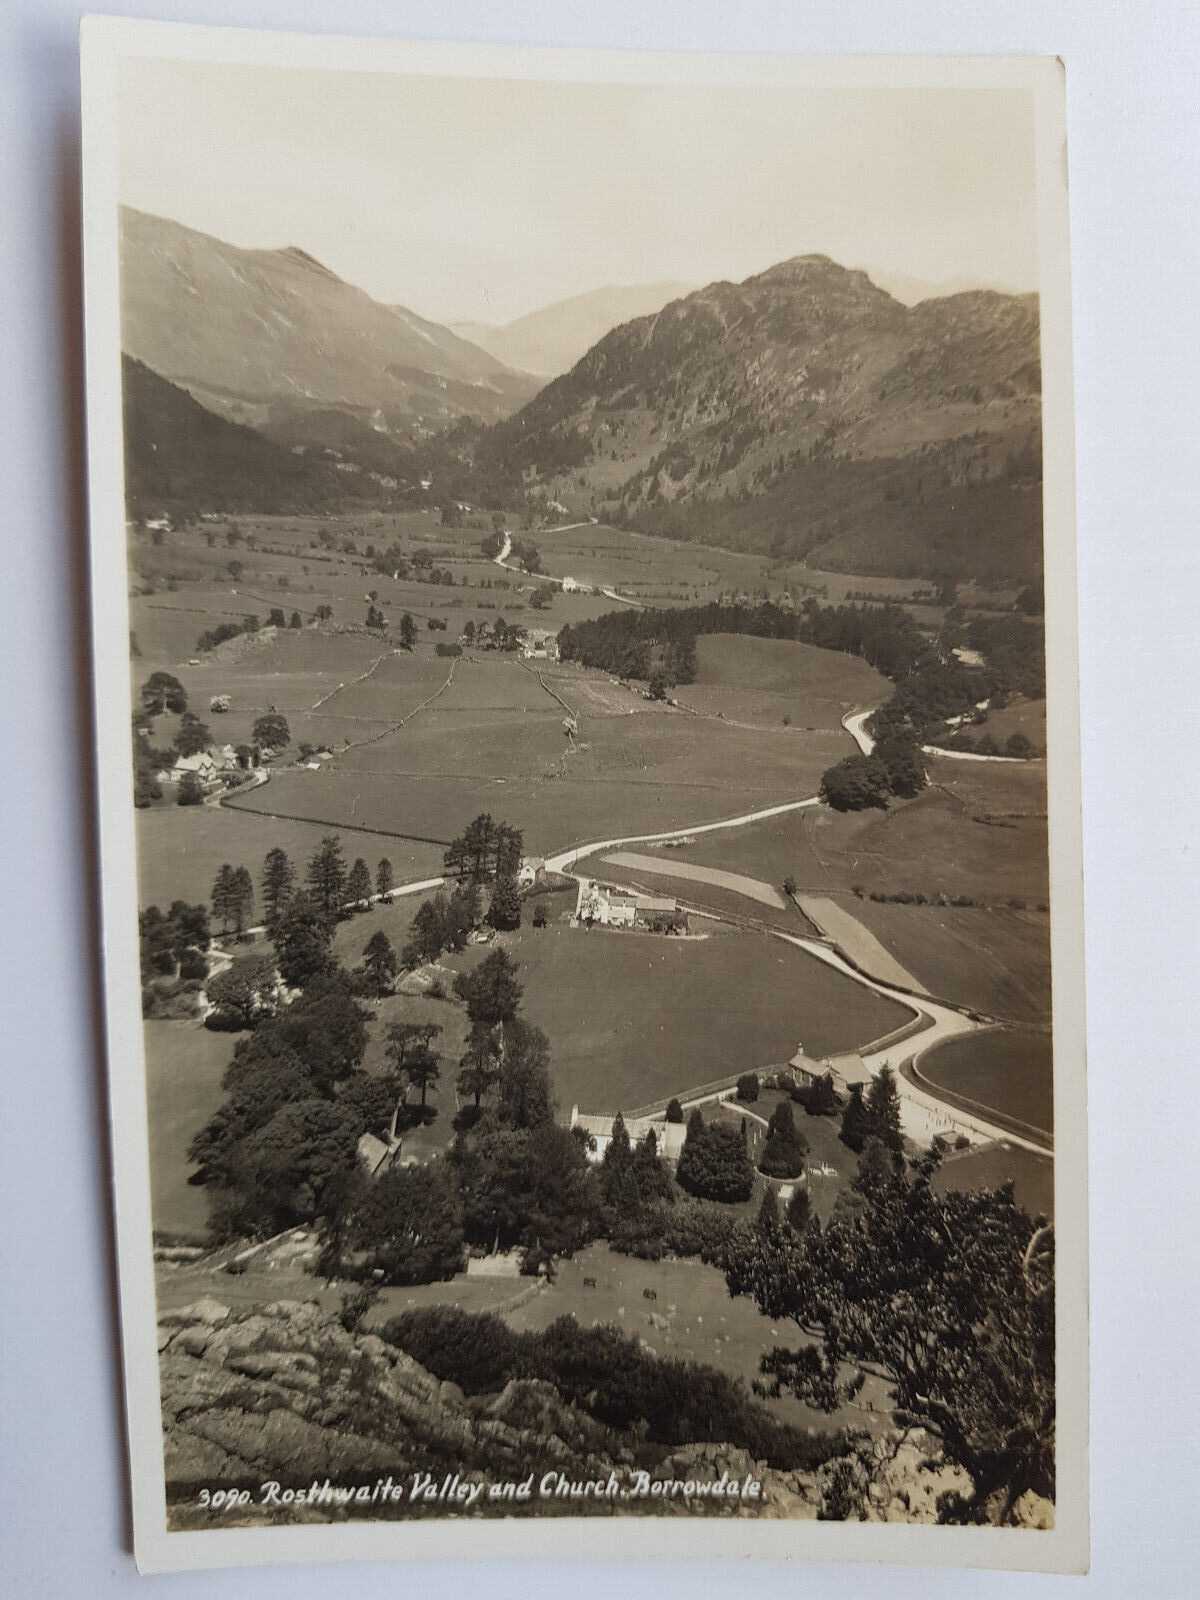 House Clearance - Vintage Service - Rosthwaite Valley and Church, Borrowdale Real Photo RPPC B&W